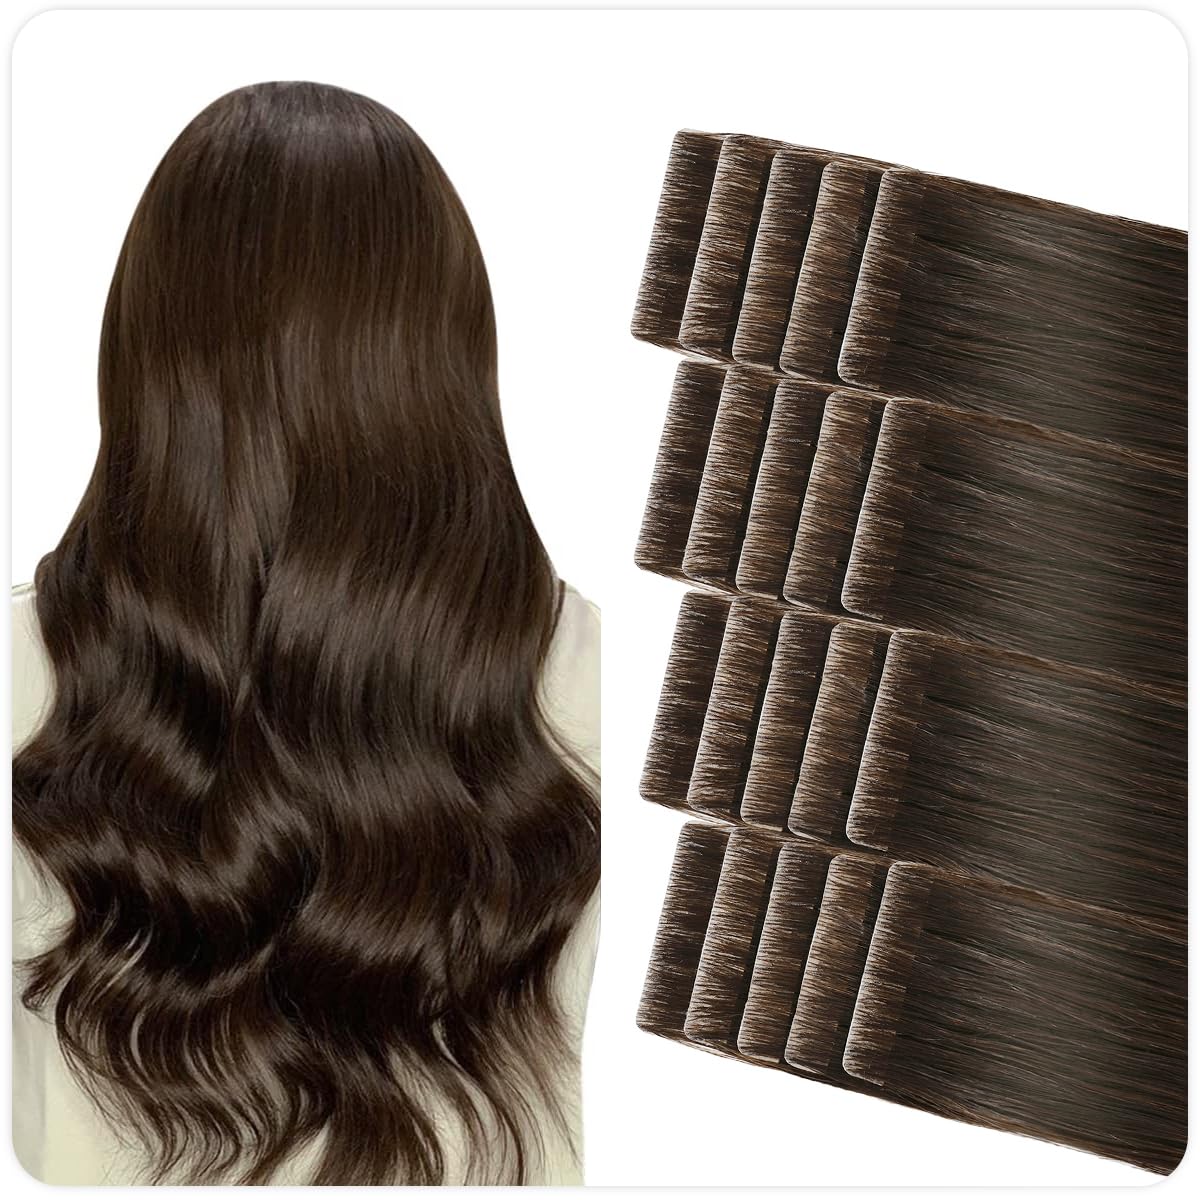 Tape-In Hair Extension Experts in Lilburn-near-me- Material	Human Hair Extension Length Style	Long Straight Hair-Invisible Tape in Hair Extensions Human Hair Darkest Brown Seamless Injected Hand-Tied Pro Quality Virgin Human Hair 20PCS 50G/Pack Straight Tape... Size:18 Inch Color:#2 Darkest Brown Pro Invisible- Meet Kia Styles, Your Hair Extension Specialist and Hair Loss Solution Provider, Serving Georgia, Tennessee, Alabama, Florida, South & North Carolina. Join Our Trail of Happy Clients.